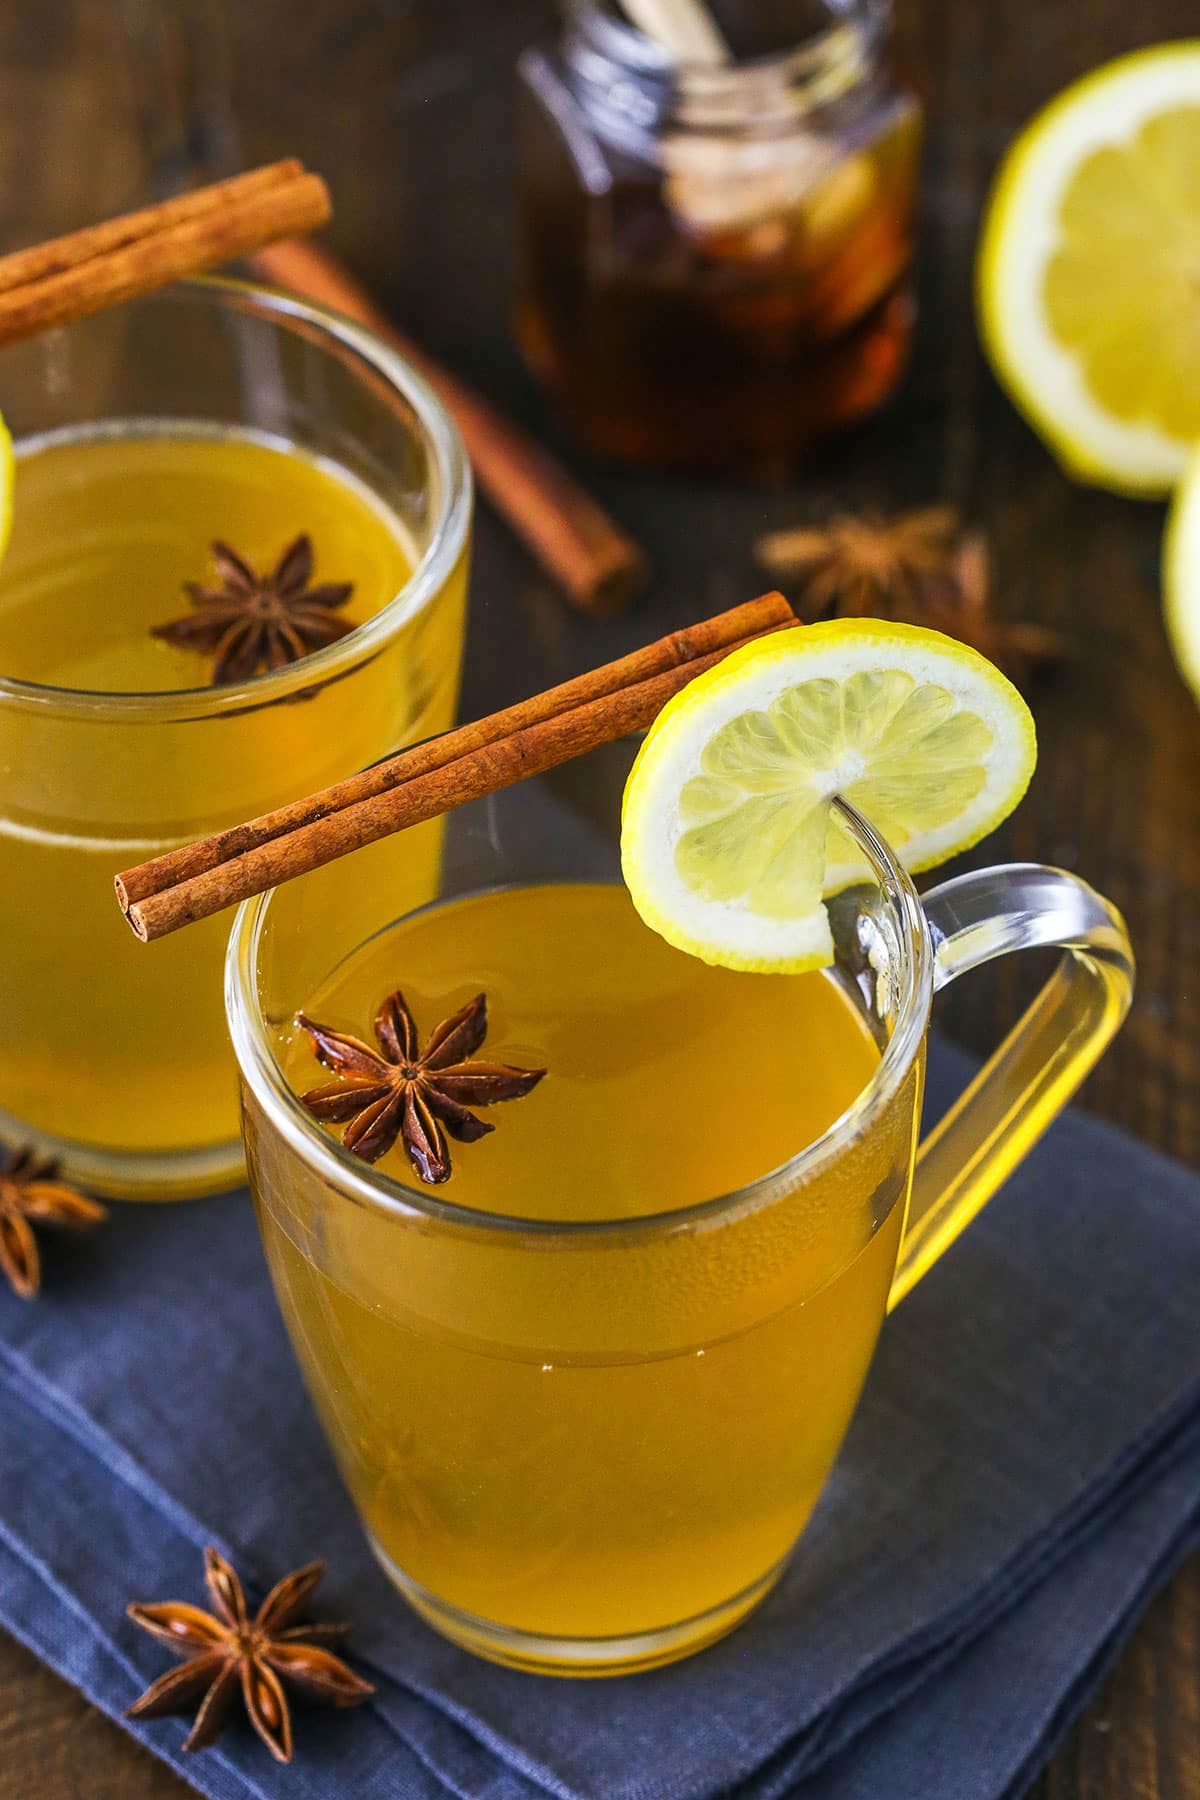 Hot Toddy Remedy For Sore Throat